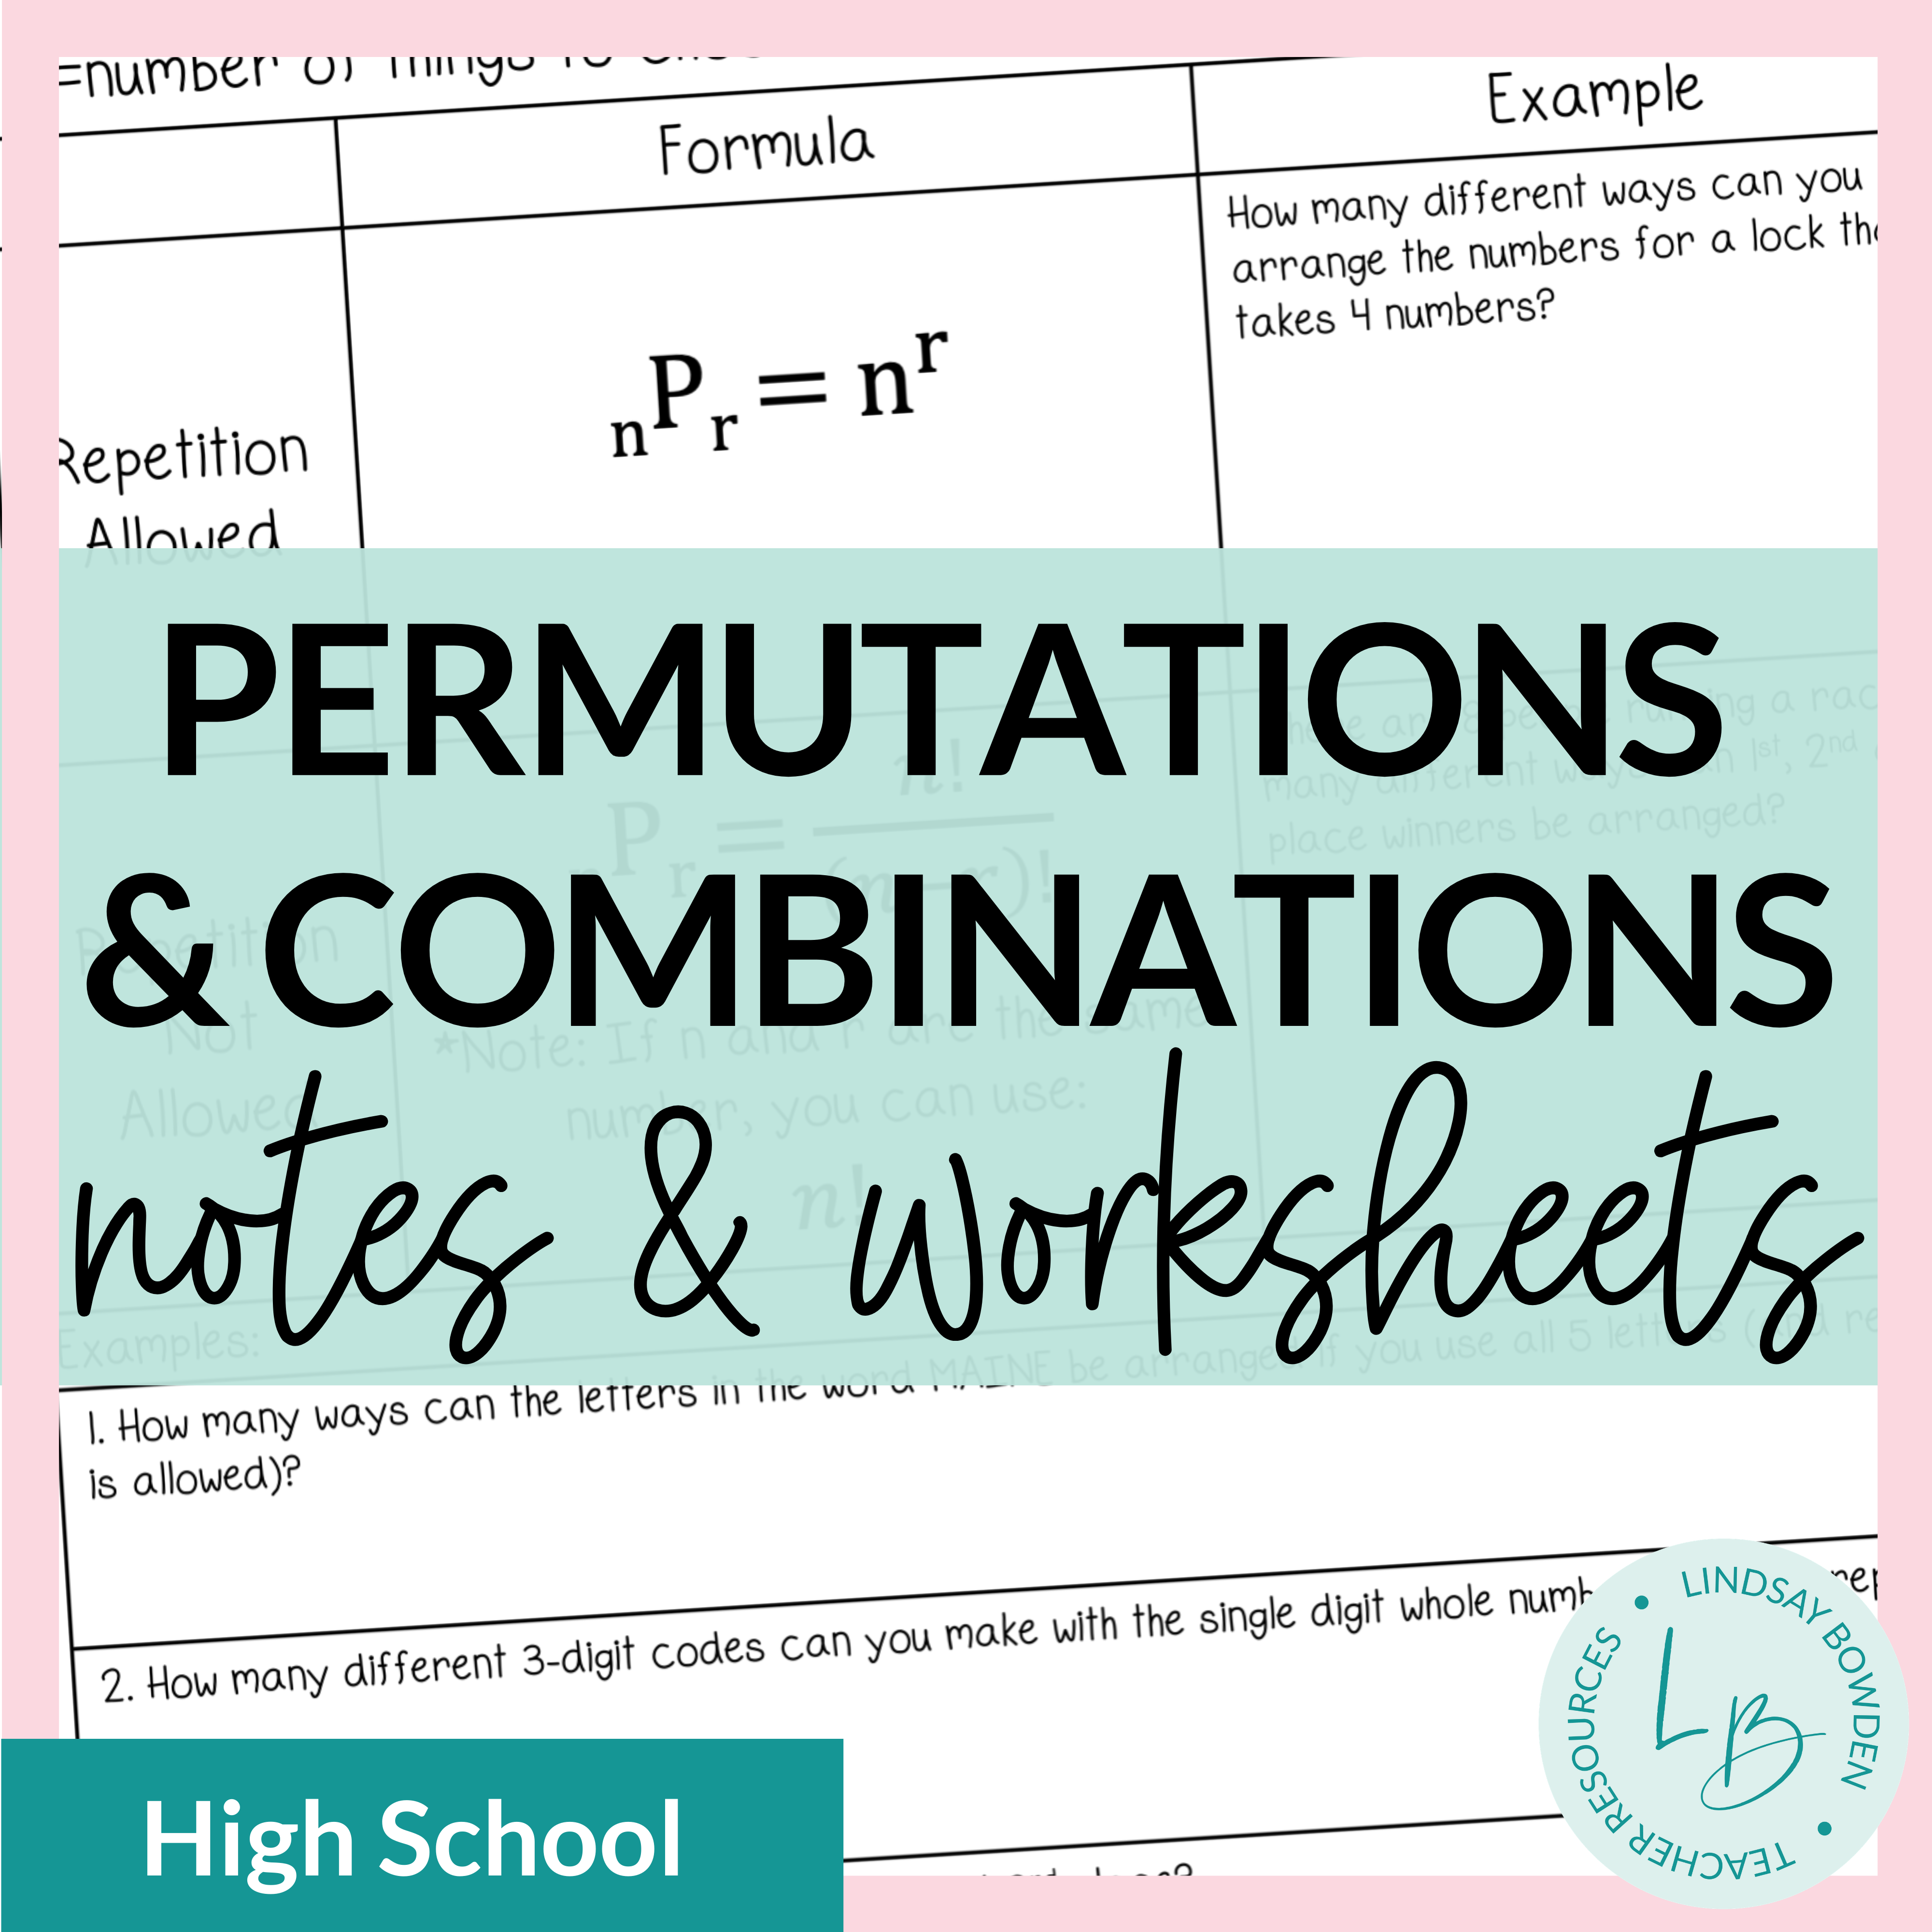 Permutations and Combinations Notes and Worksheets - Lindsay Bowden Throughout Combinations And Permutations Worksheet